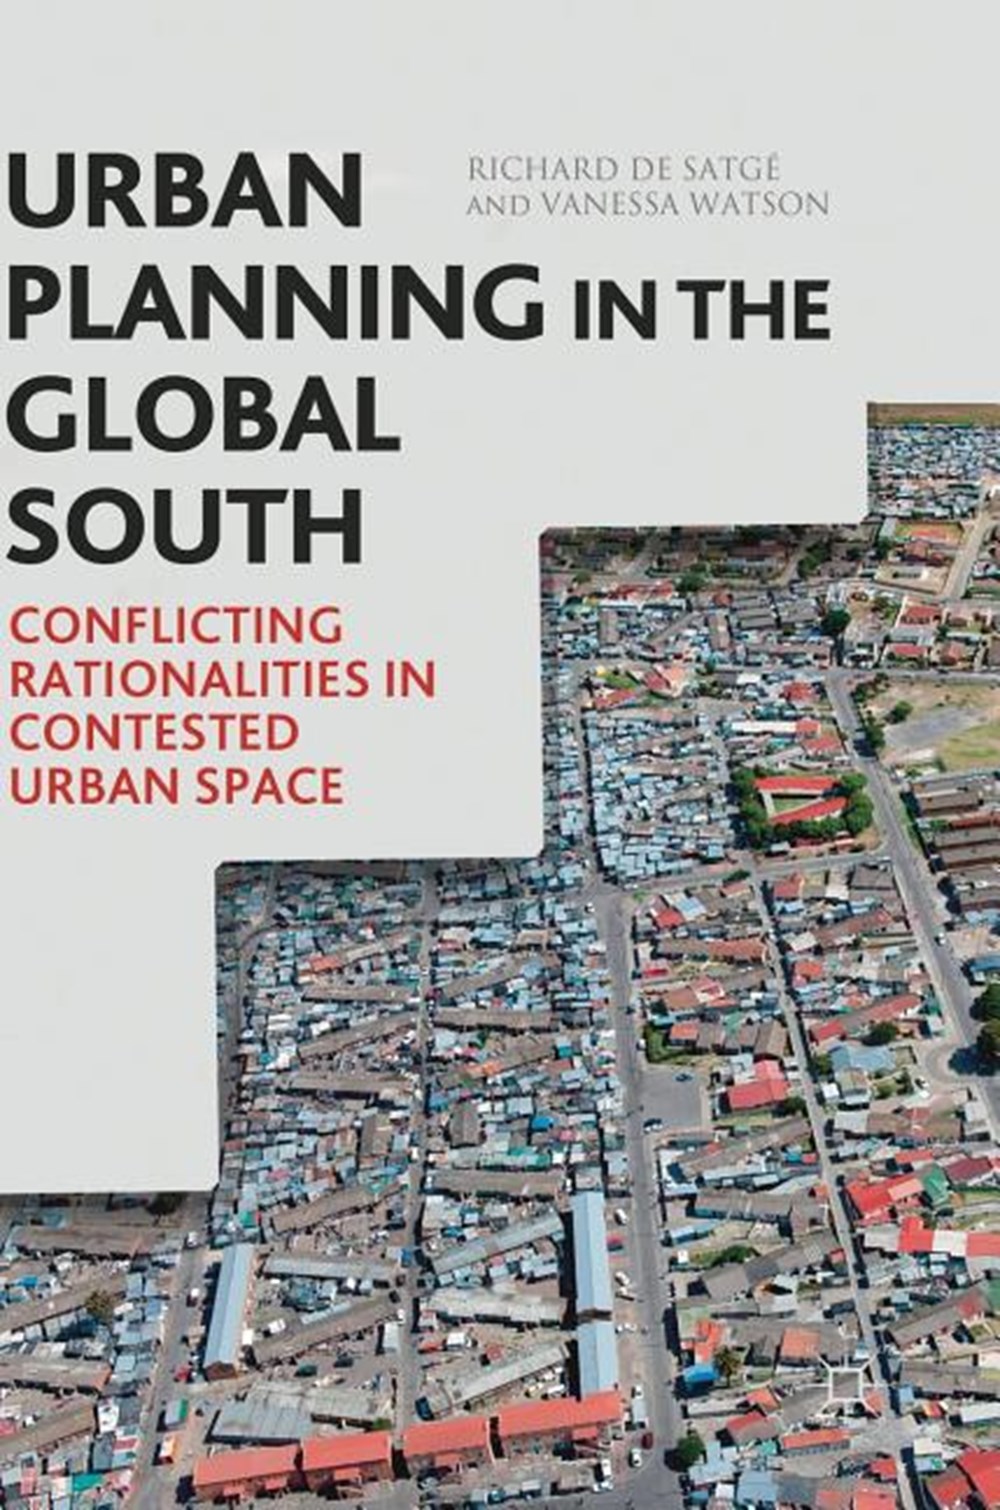 Urban Planning in the Global South: Conflicting Rationalities in Contested Urban Space (2018)